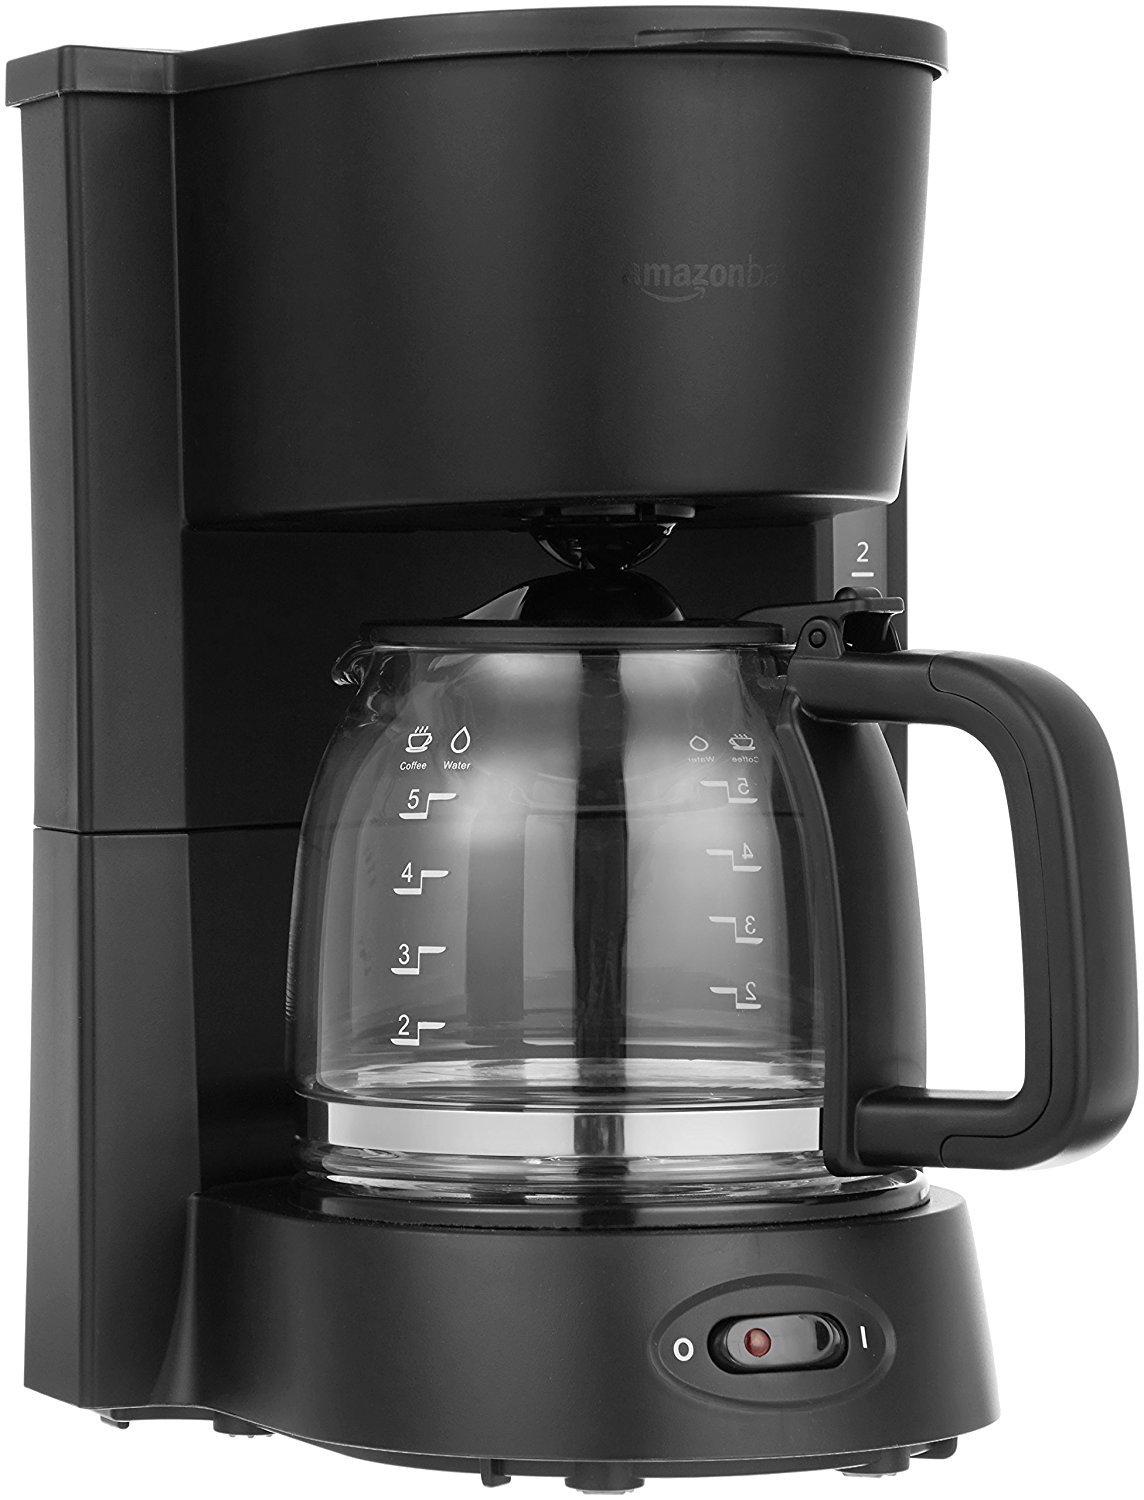 5-Cup Coffeemaker with Glass Carafe